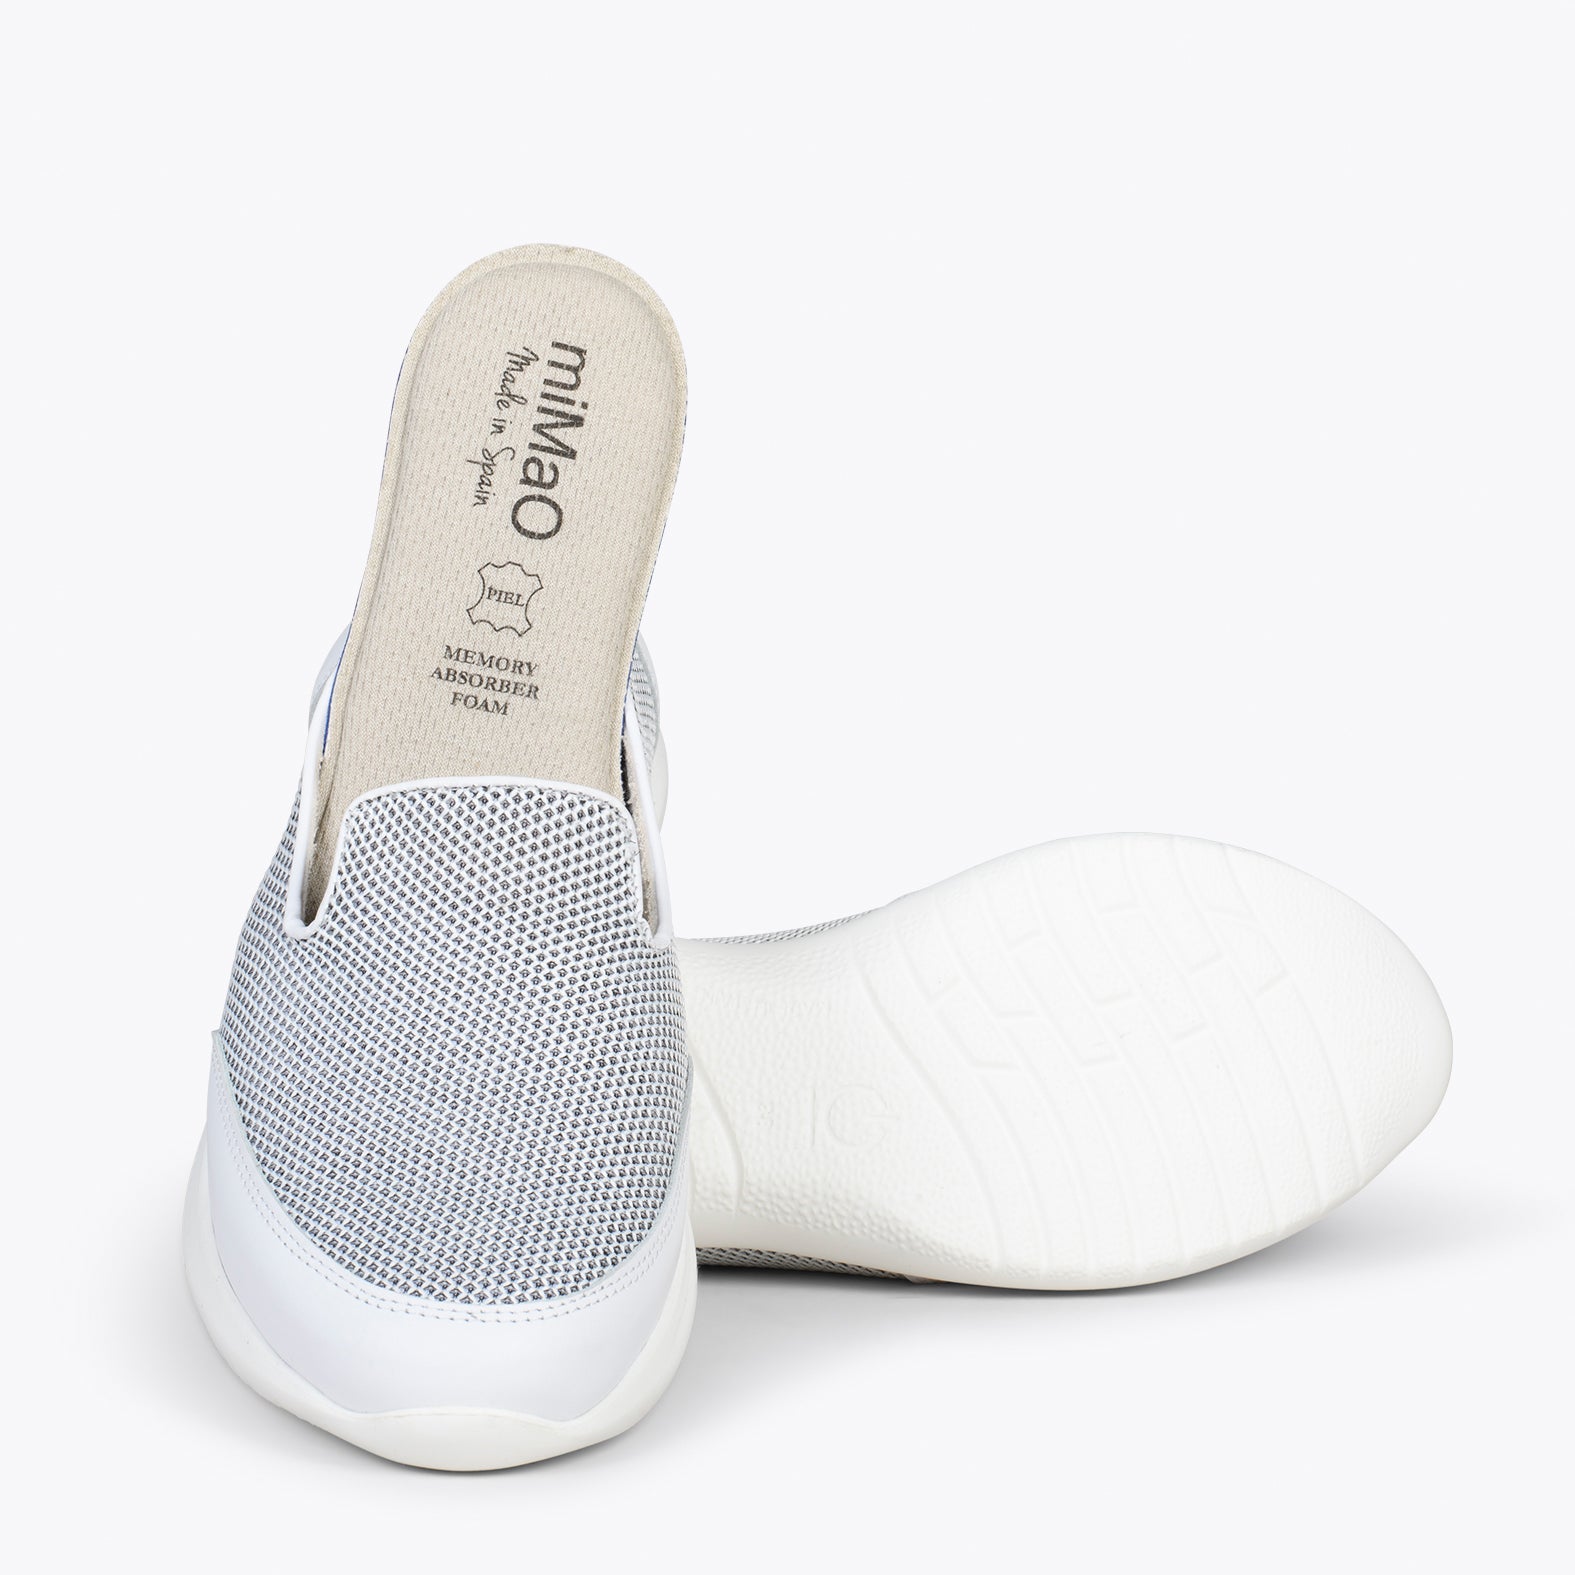 SLIPPER SPORT – WHITE sneakers with no laces and mesh design